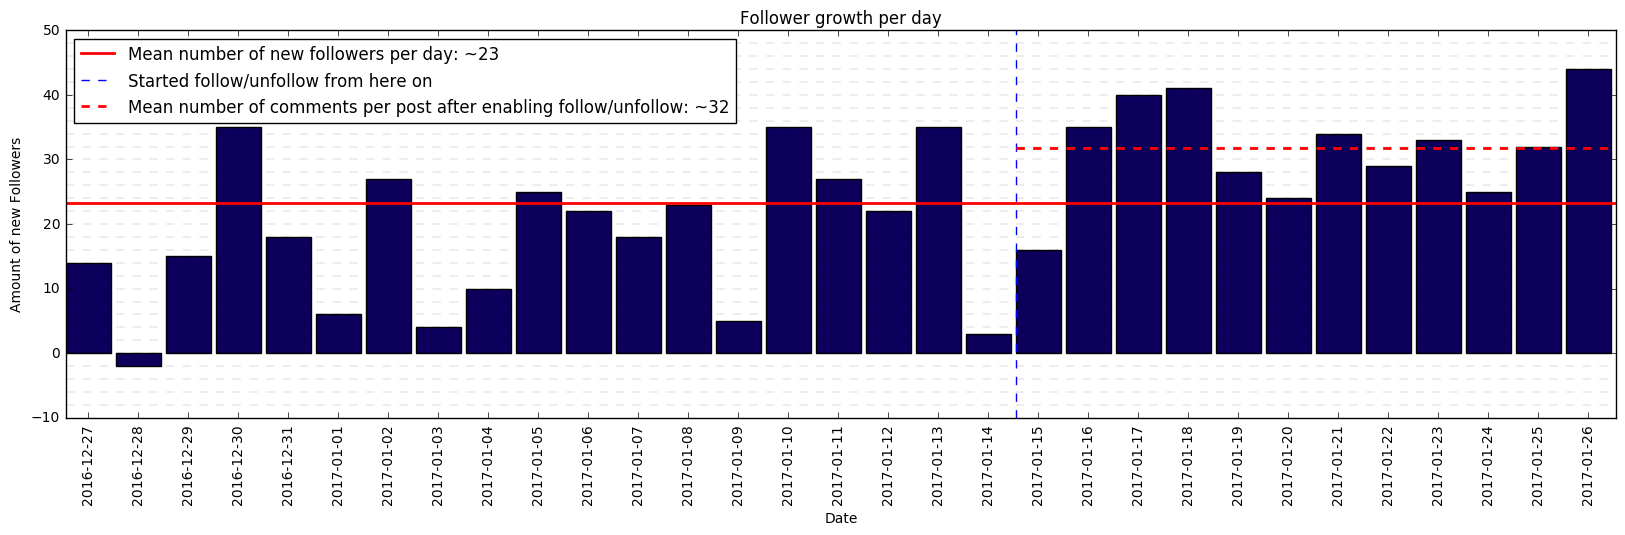 follower growth per day in the second month - instagram scripts followers